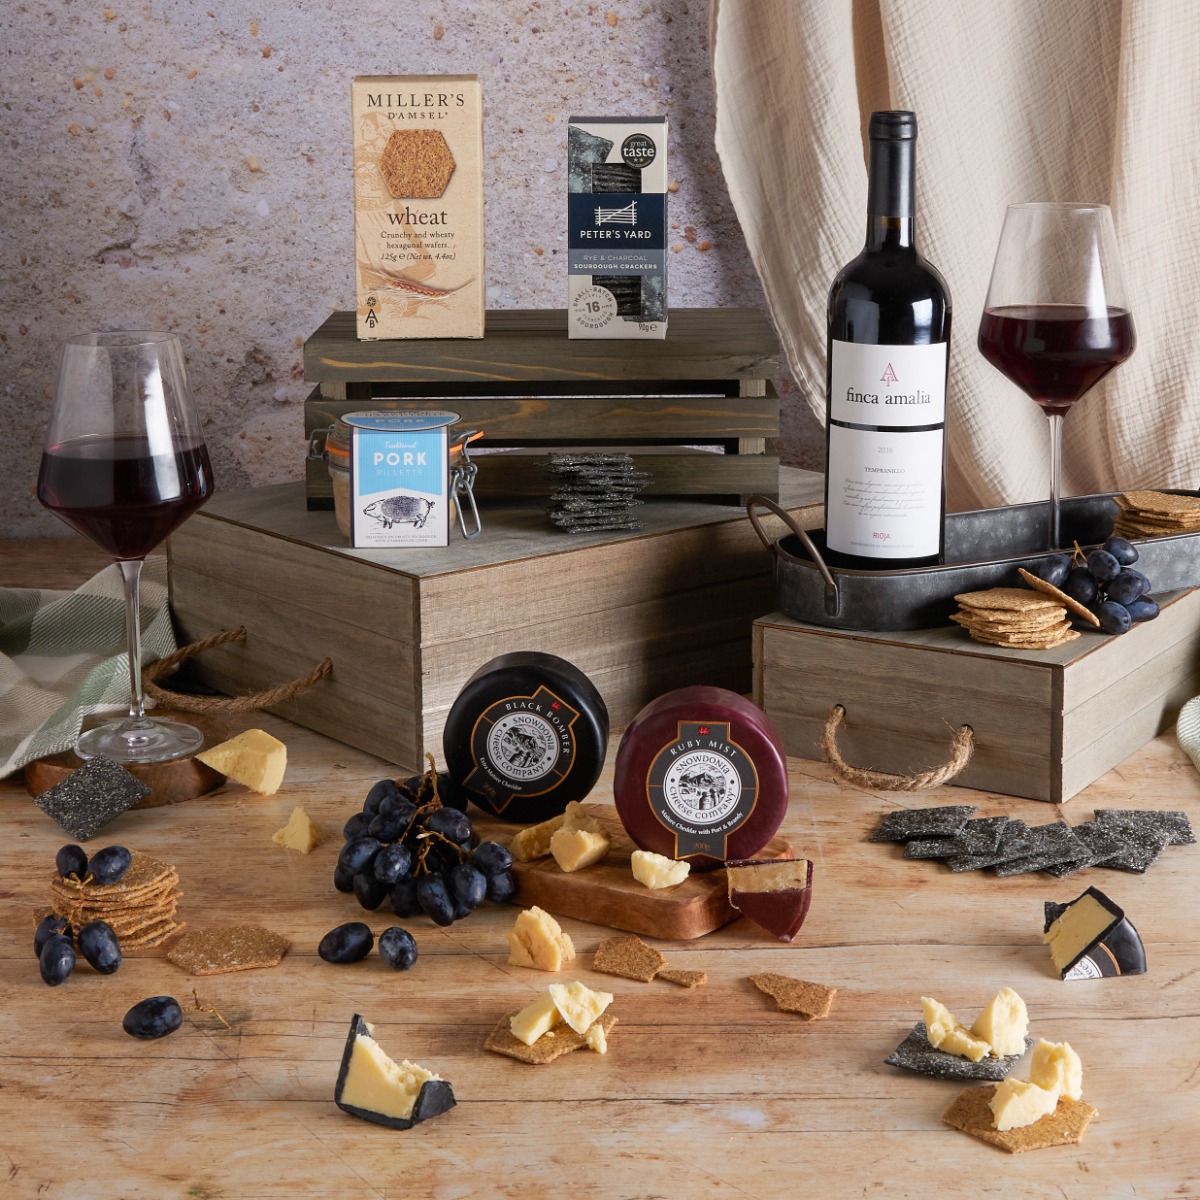 Wine, Cheese and Rillette Hamper with contents on display